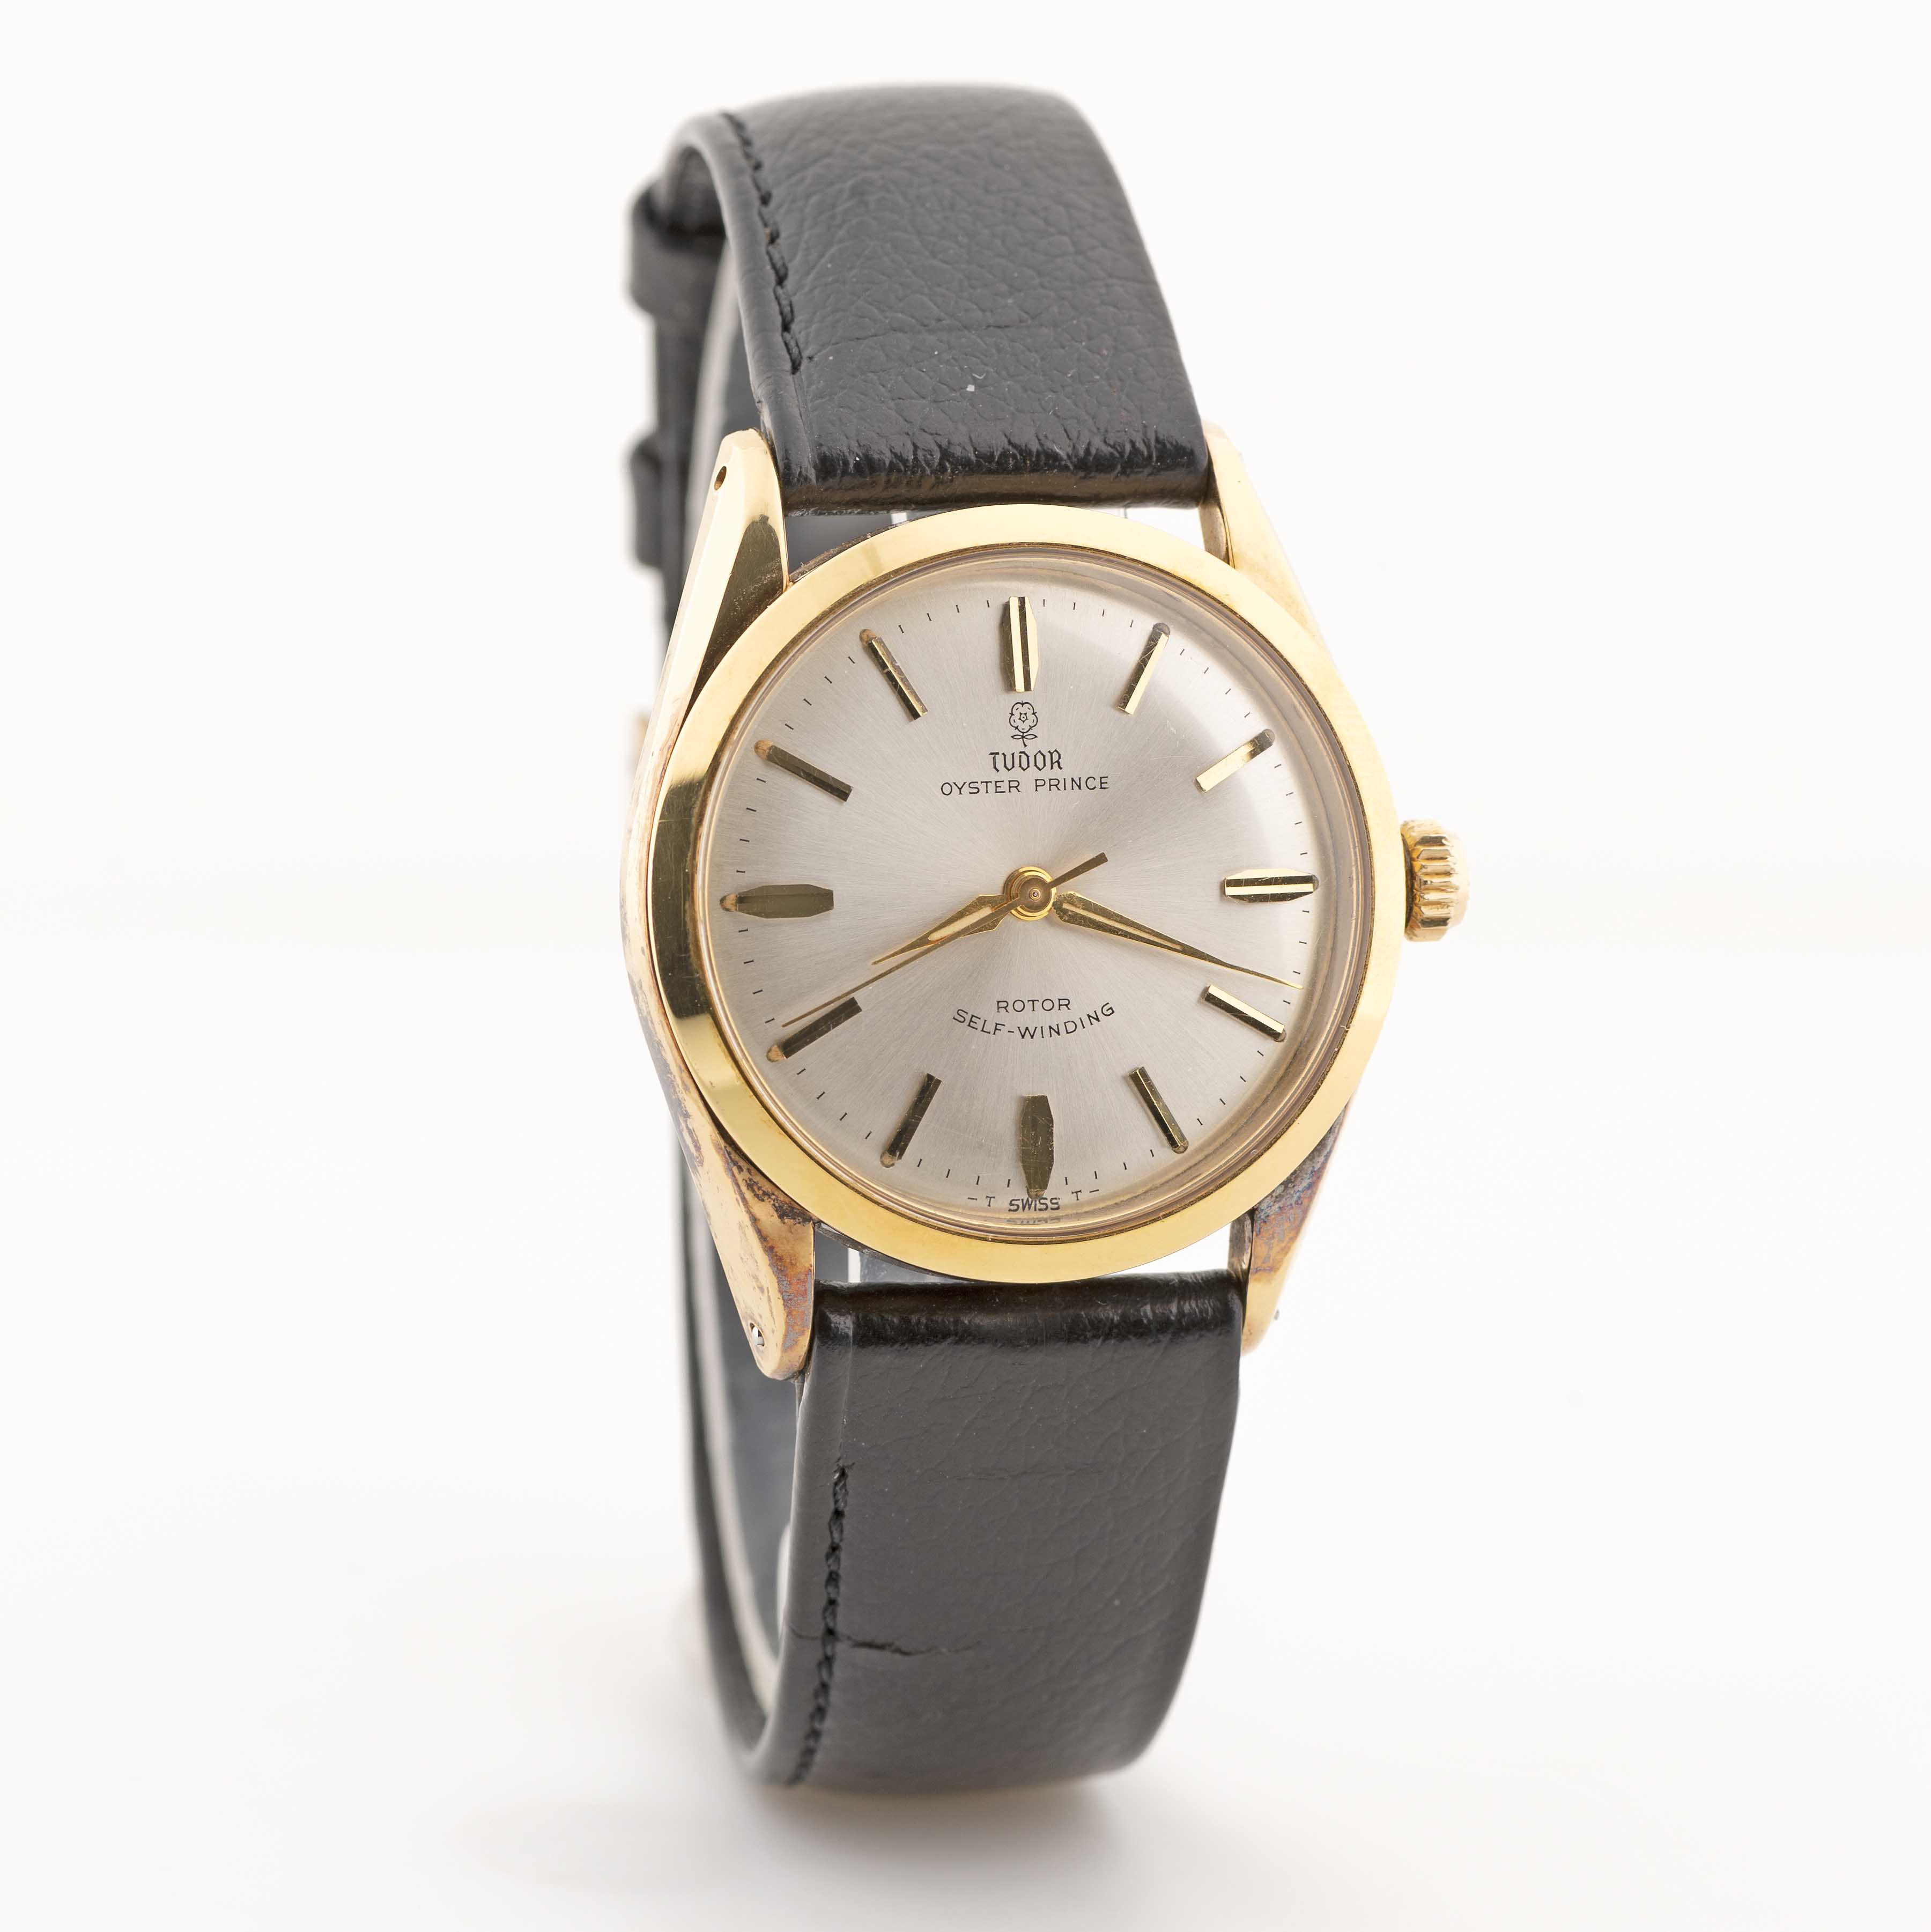 A GENTLEMAN'S GOLD PLATED TUDOR OYSTER PRINCE SELF WINDING WRIST WATCH DATED 1970, REF. 7965 WITH - Image 5 of 12